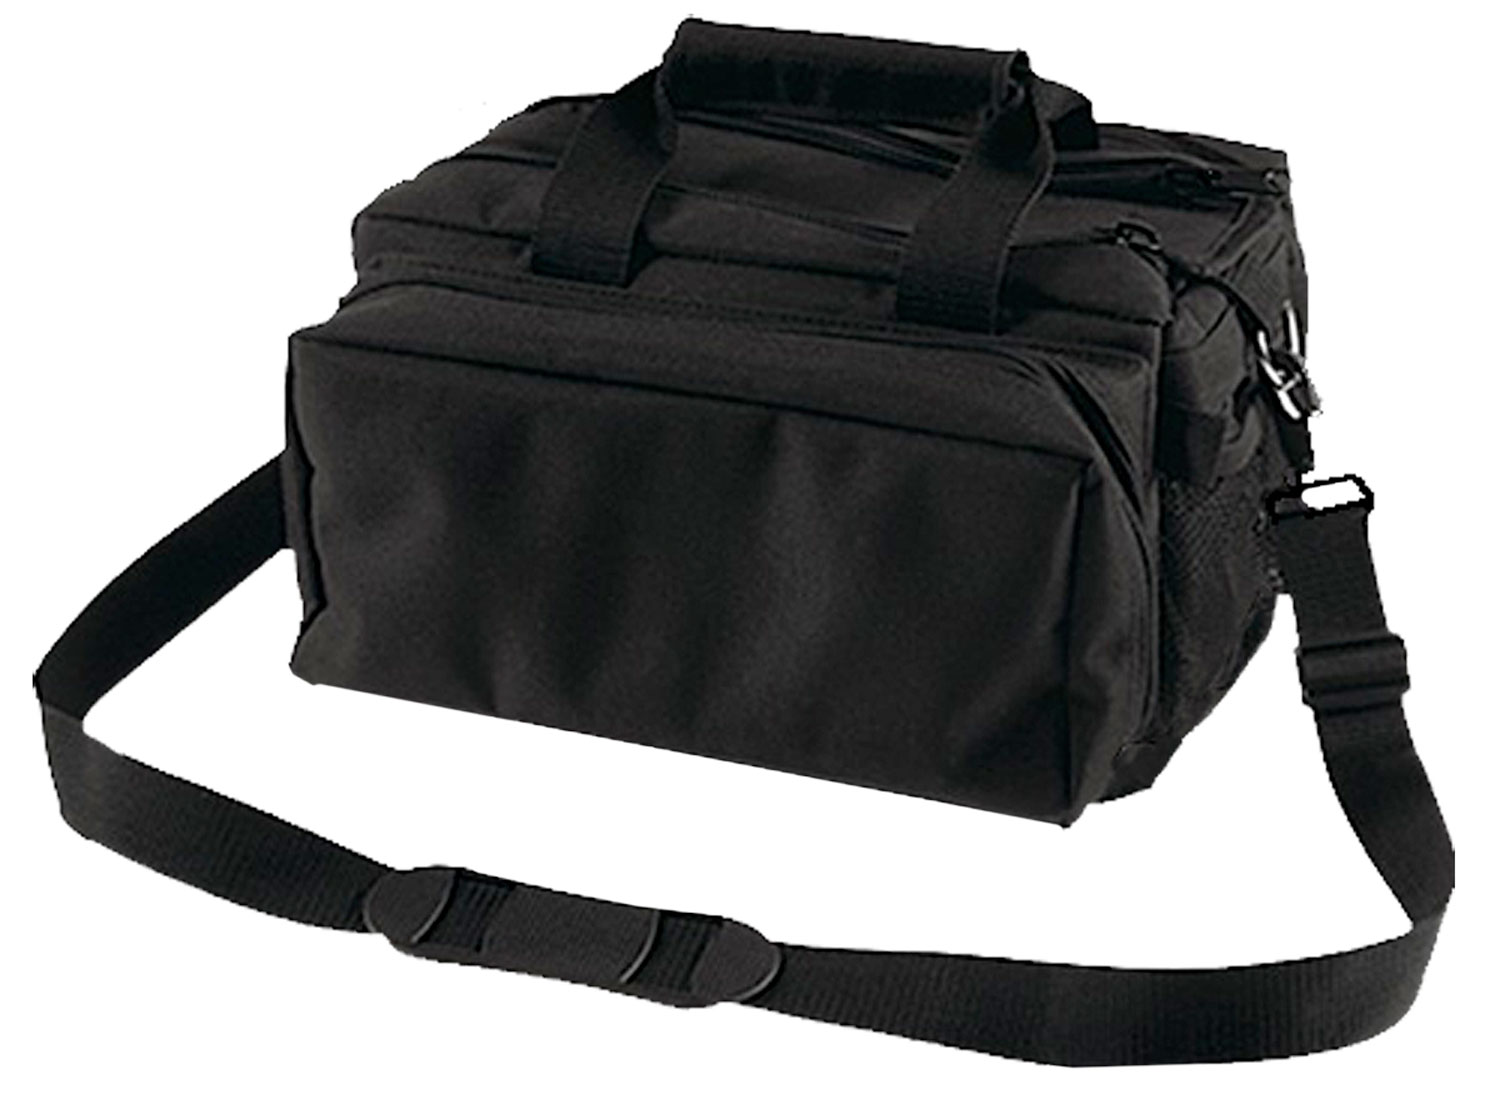 Bulldog BD910 Deluxe Range Bag Water Resistant Black Nylon with Adjustable Strap, Removeable Divider, Storage Pockets & Deluxe Padding 13